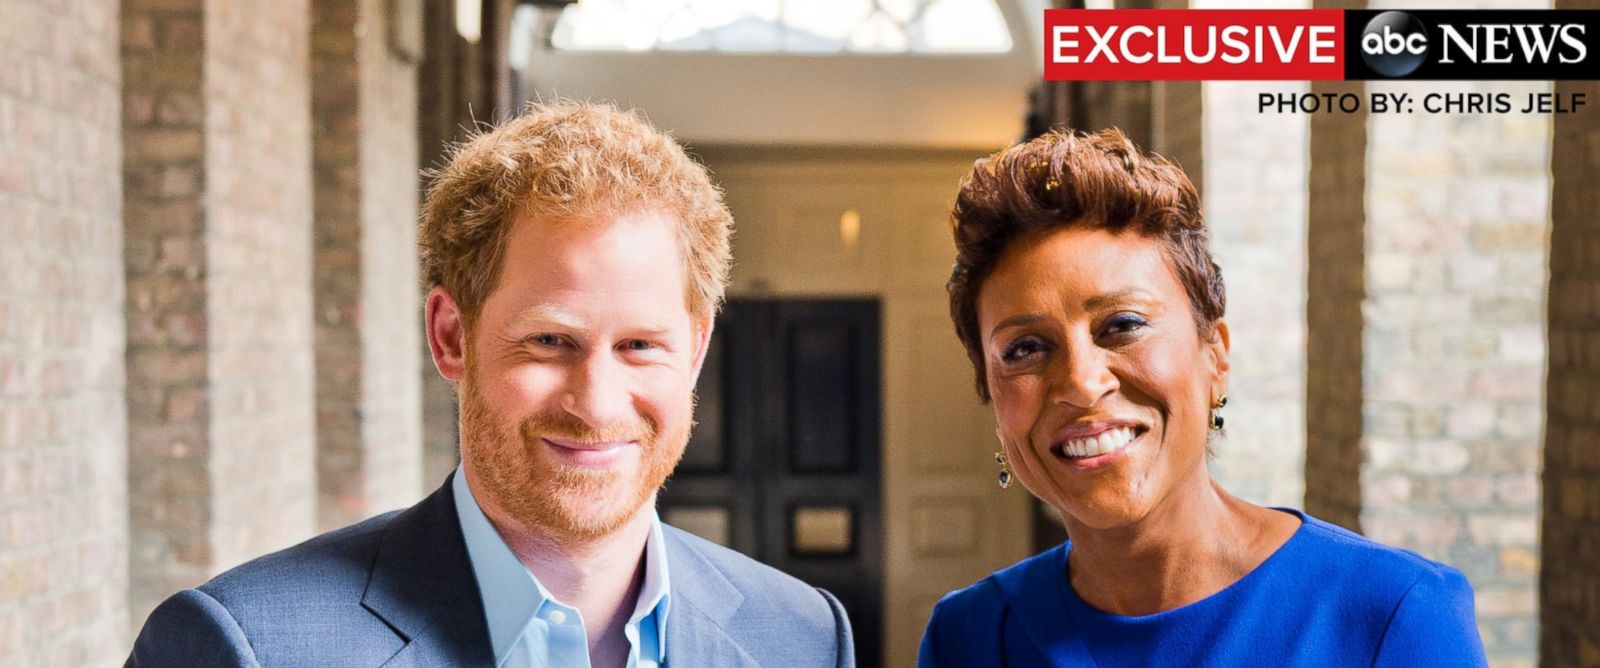 Prince Harry Opens Up on Princess Diana, Having Kids and What Drives Him in Candid New Interview